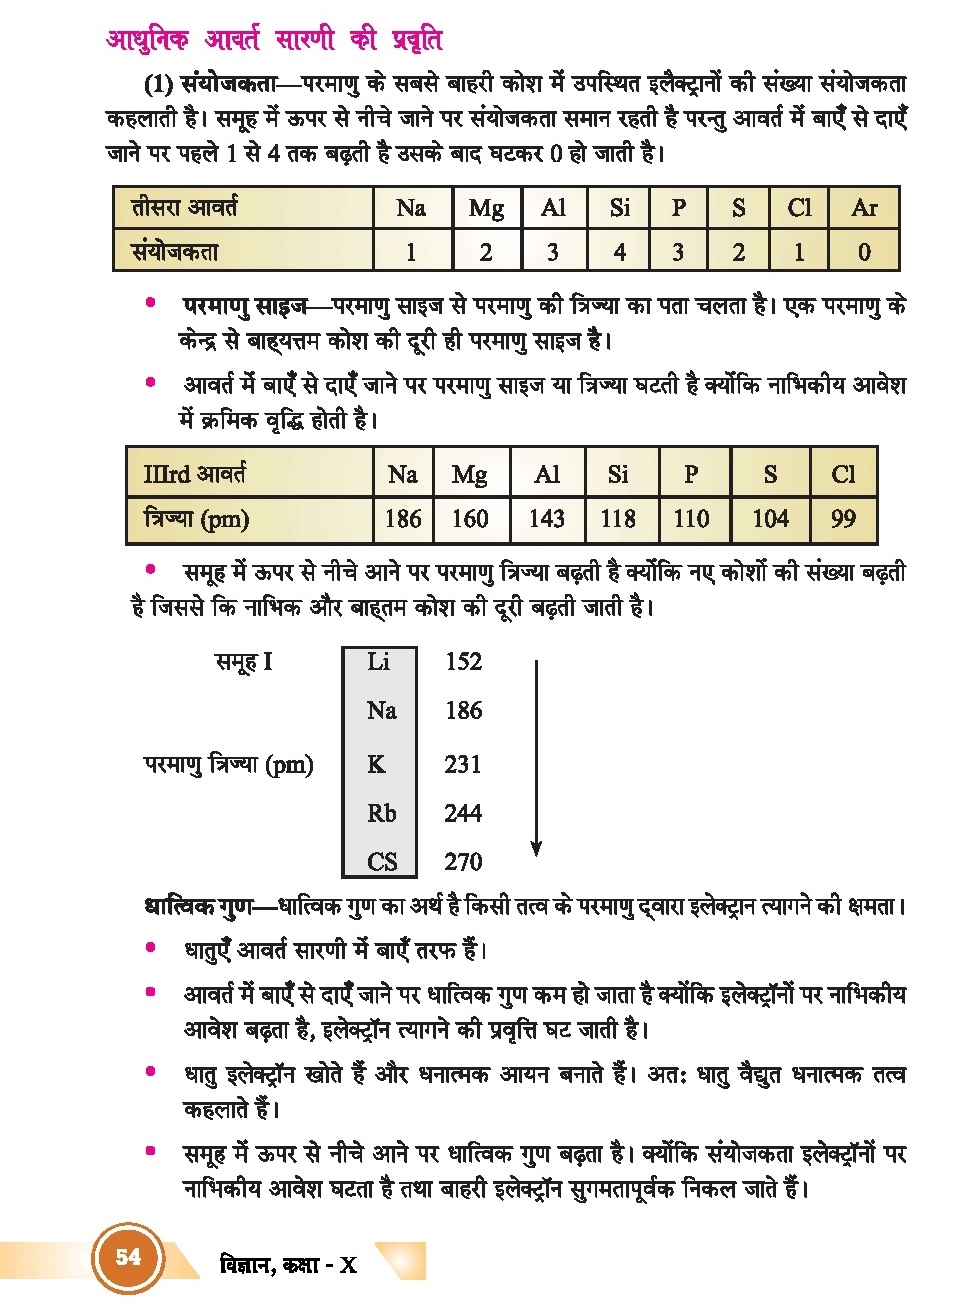 NCERT Solutions for Class 10 Science Chapter 5 